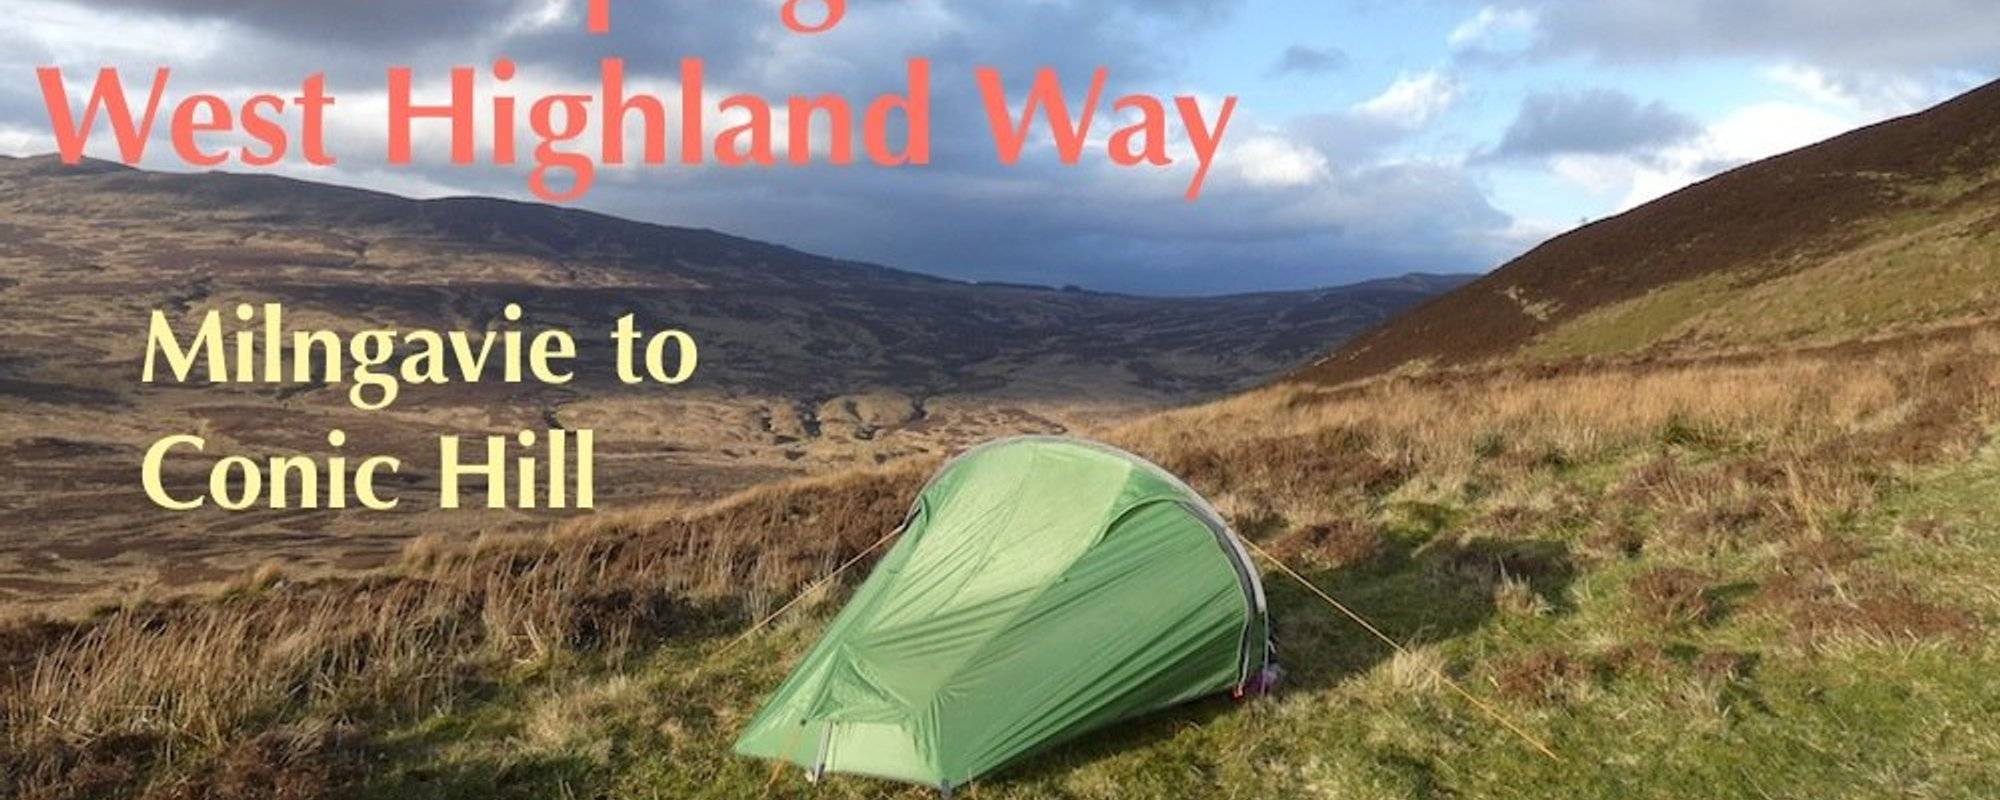 Wildcamping the West Highland Way - Day 1